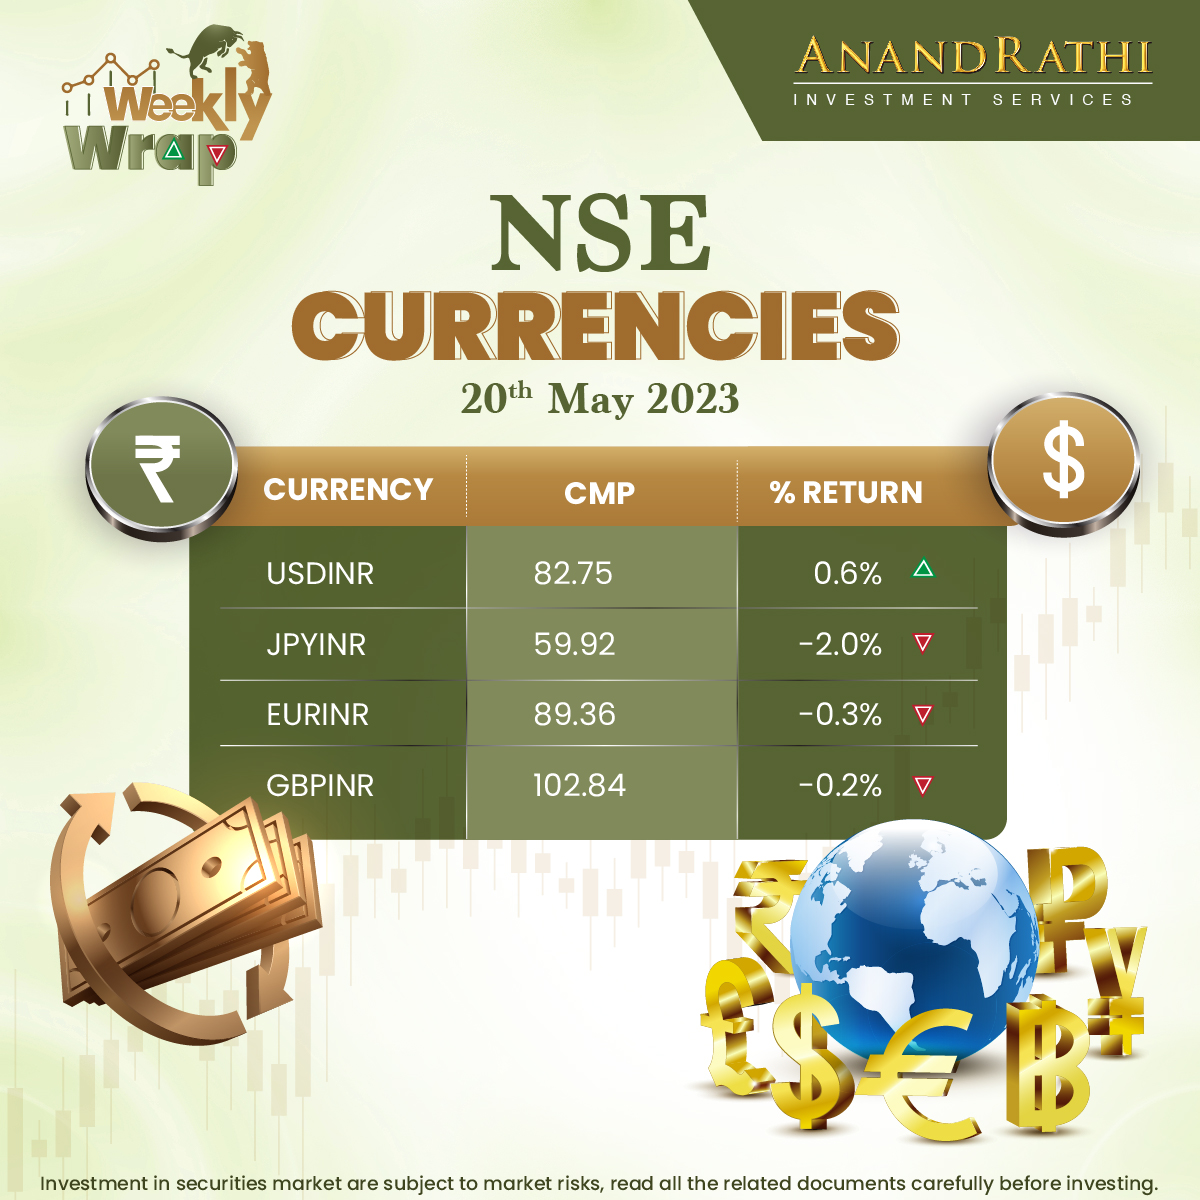 Take a glance at our Weekly Wrap - NSE Currencies

Disclaimer -  bit.ly/AnandRathiRese…

#WeeklyWrap #anandrathi #stockbroker #stockmarket #commodities #currencies #international #nifty #sense